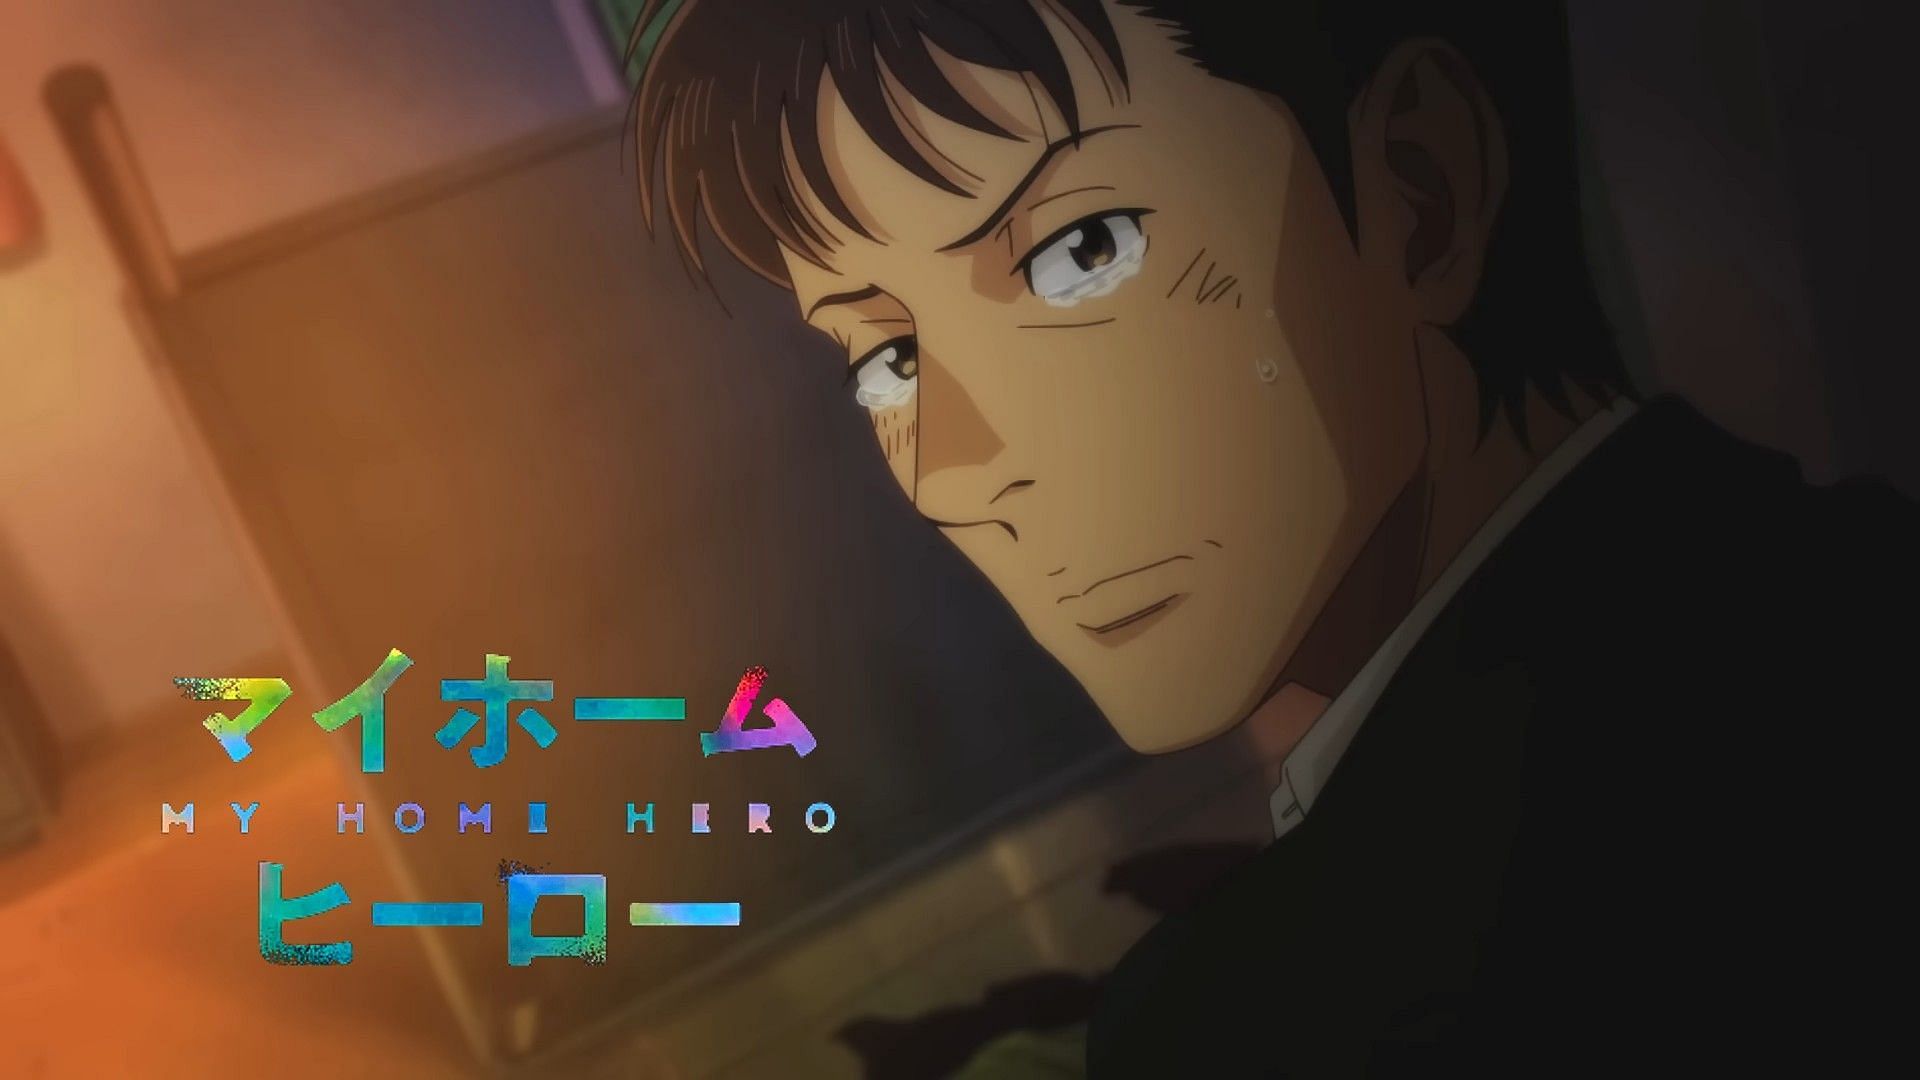 My Home Hero - Episode 1: A crime thriller with undertones of a